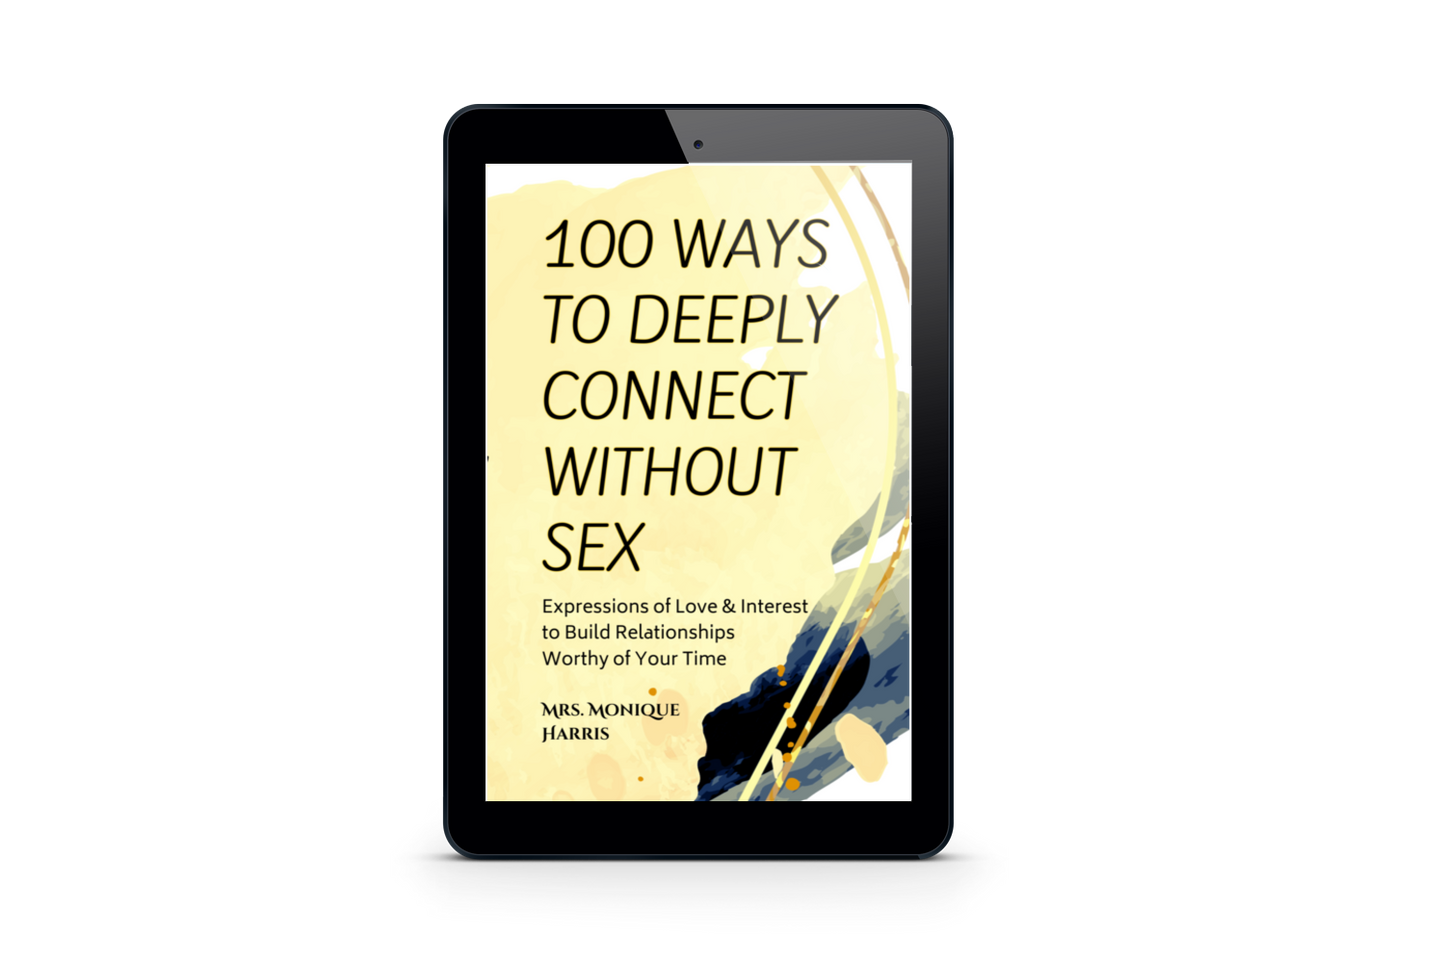 eBook - 100 ways to Deeply Connect Without Sex: Expressions of Love & Interest to Build Relationships Worthy of Your Time